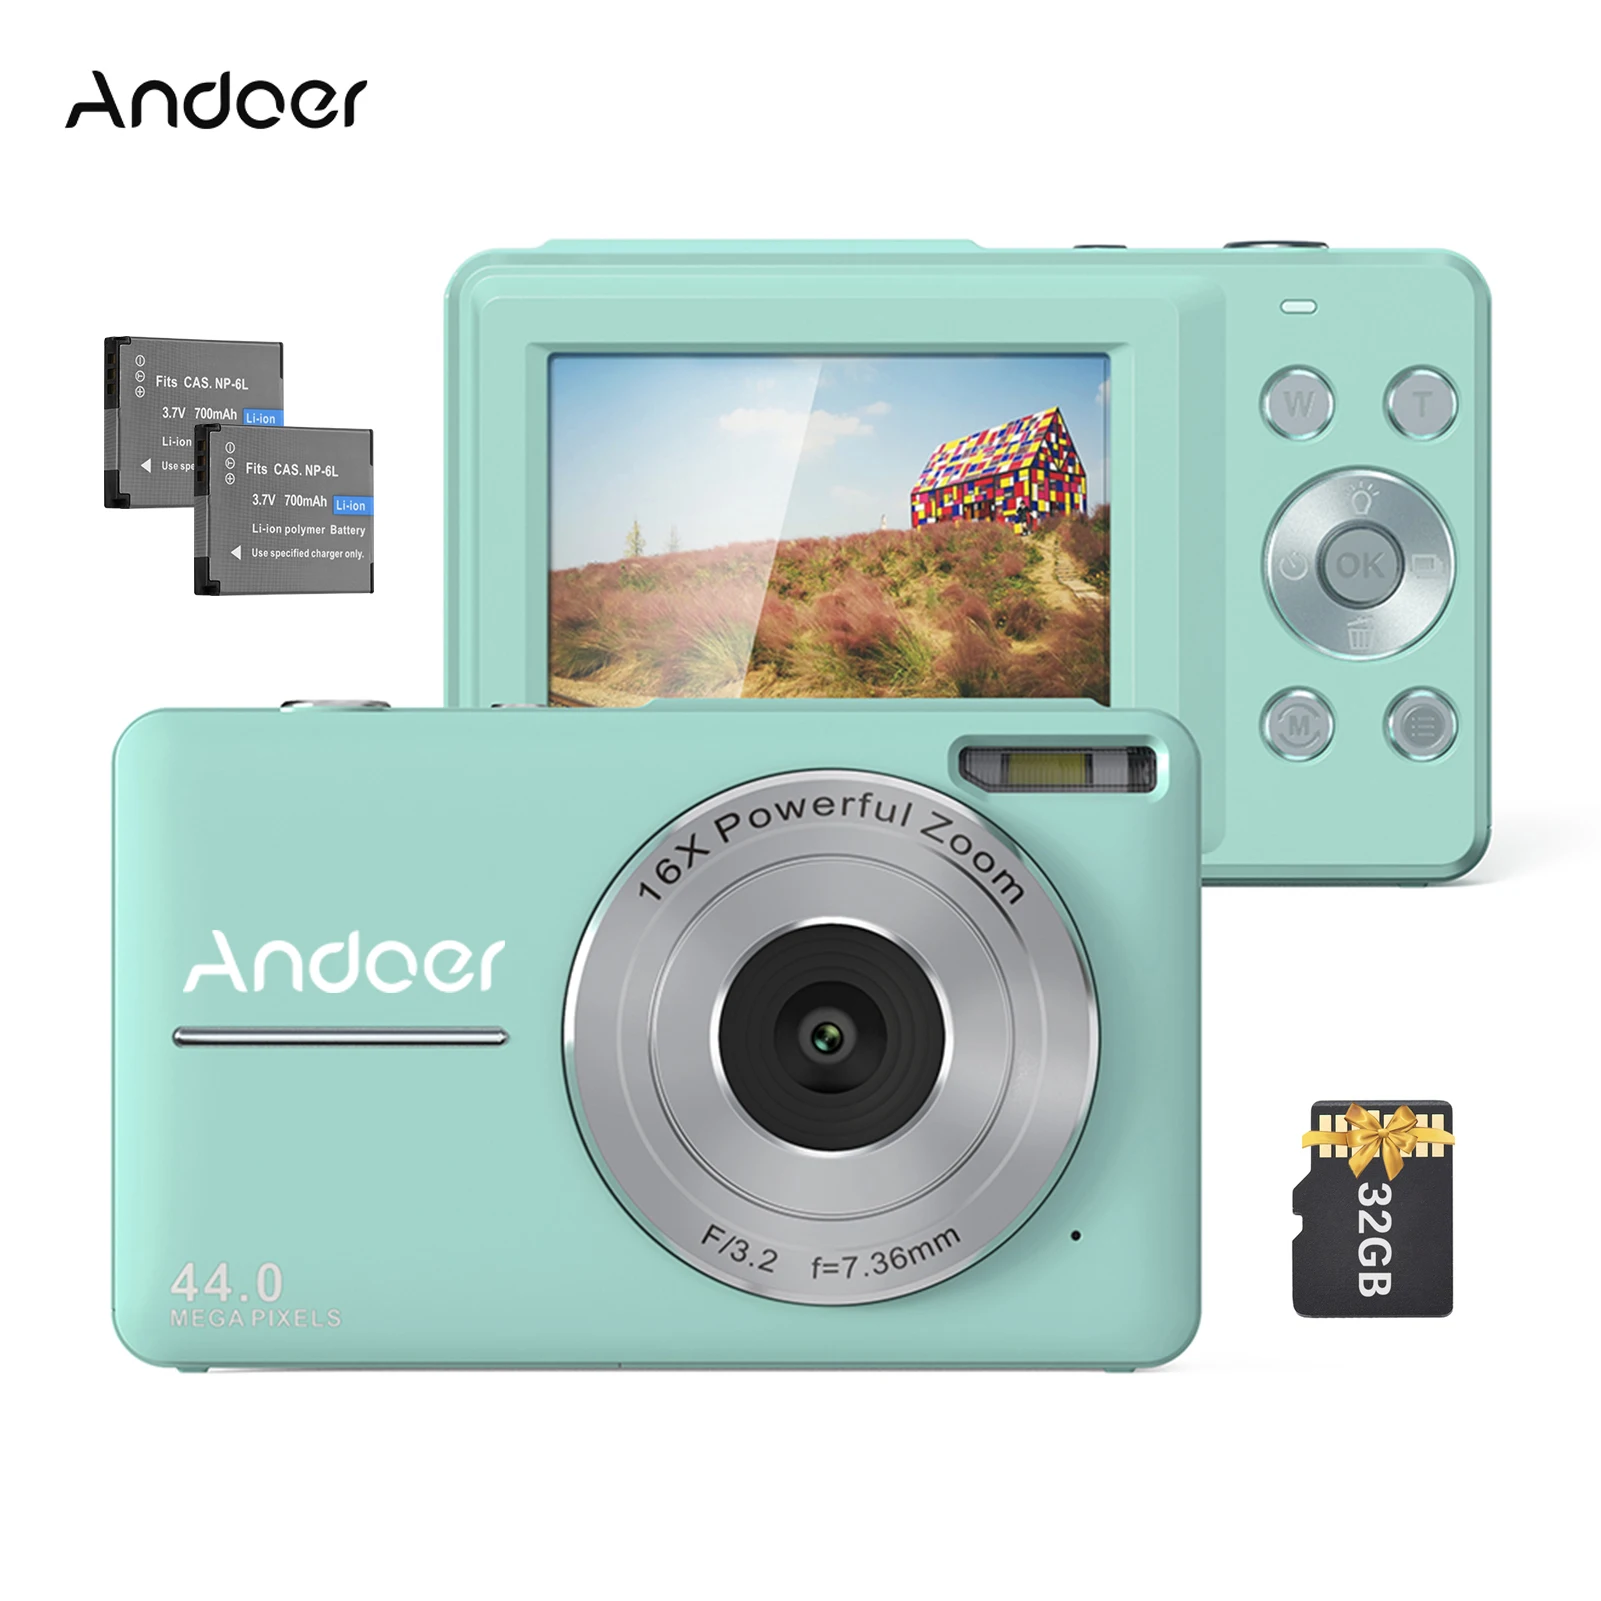 Andoer Portable Digital Camera 1080P Video Camcorder 44MP with 32GB Memory Card 2pcs Batteries Christmas Gift for Kids Teens